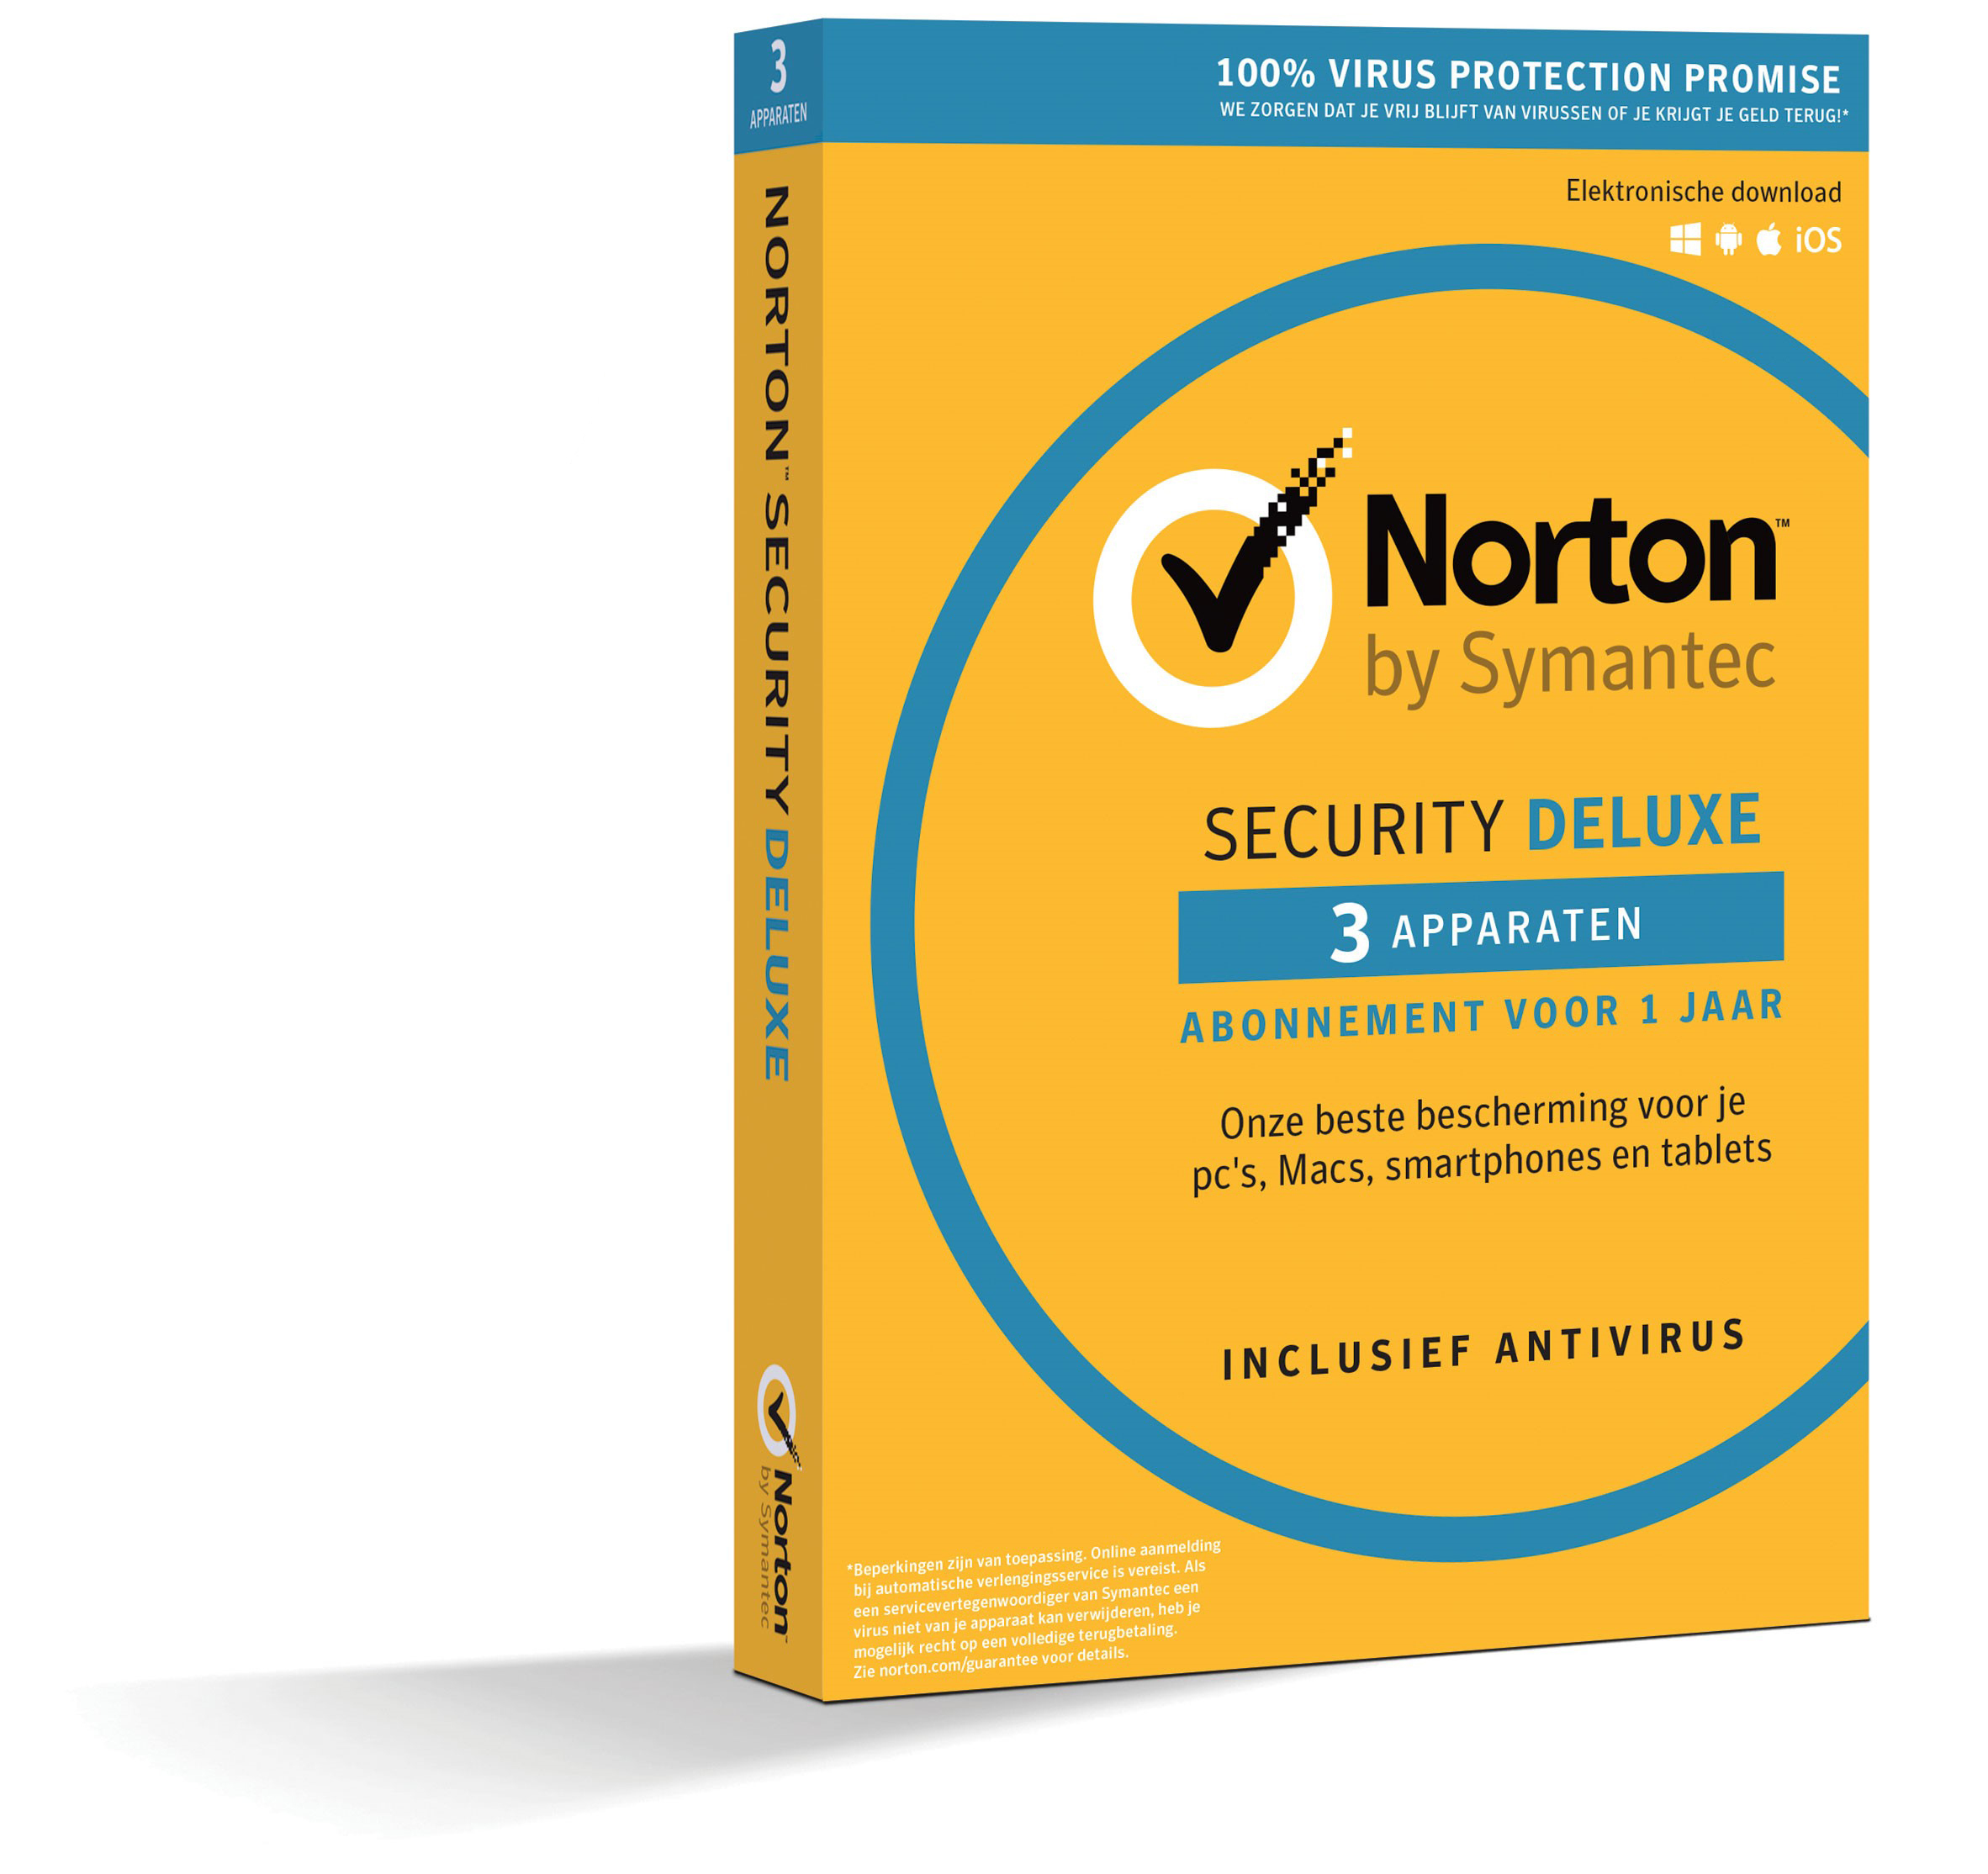 Norton Security Standard. Protect 3 devices, pay for 1.